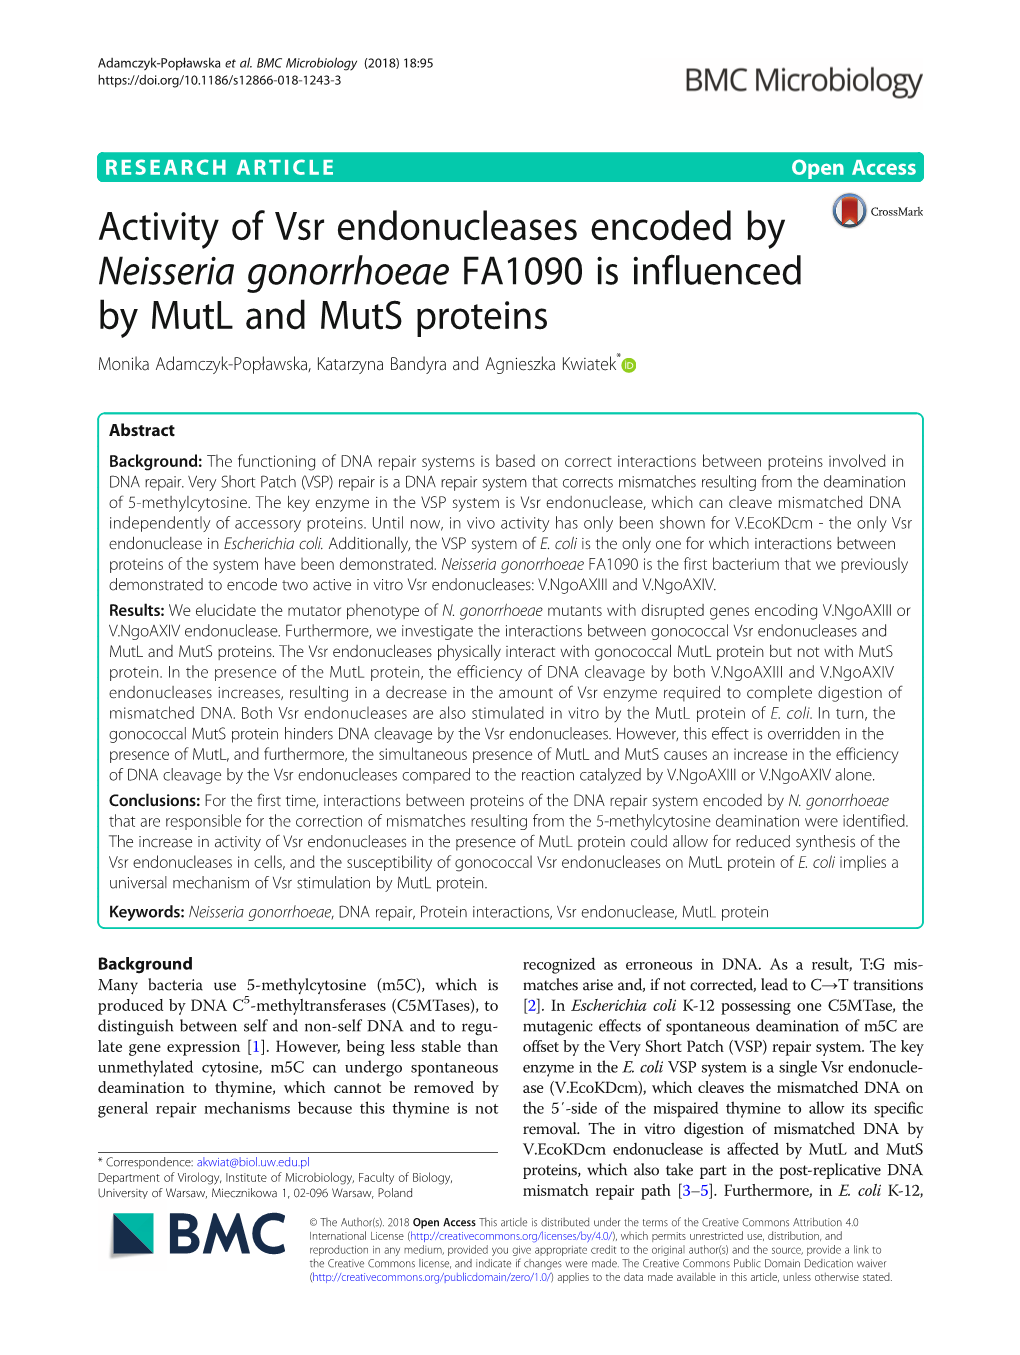 Activity of Vsr Endonucleases Encoded by Neisseria Gonorrhoeae